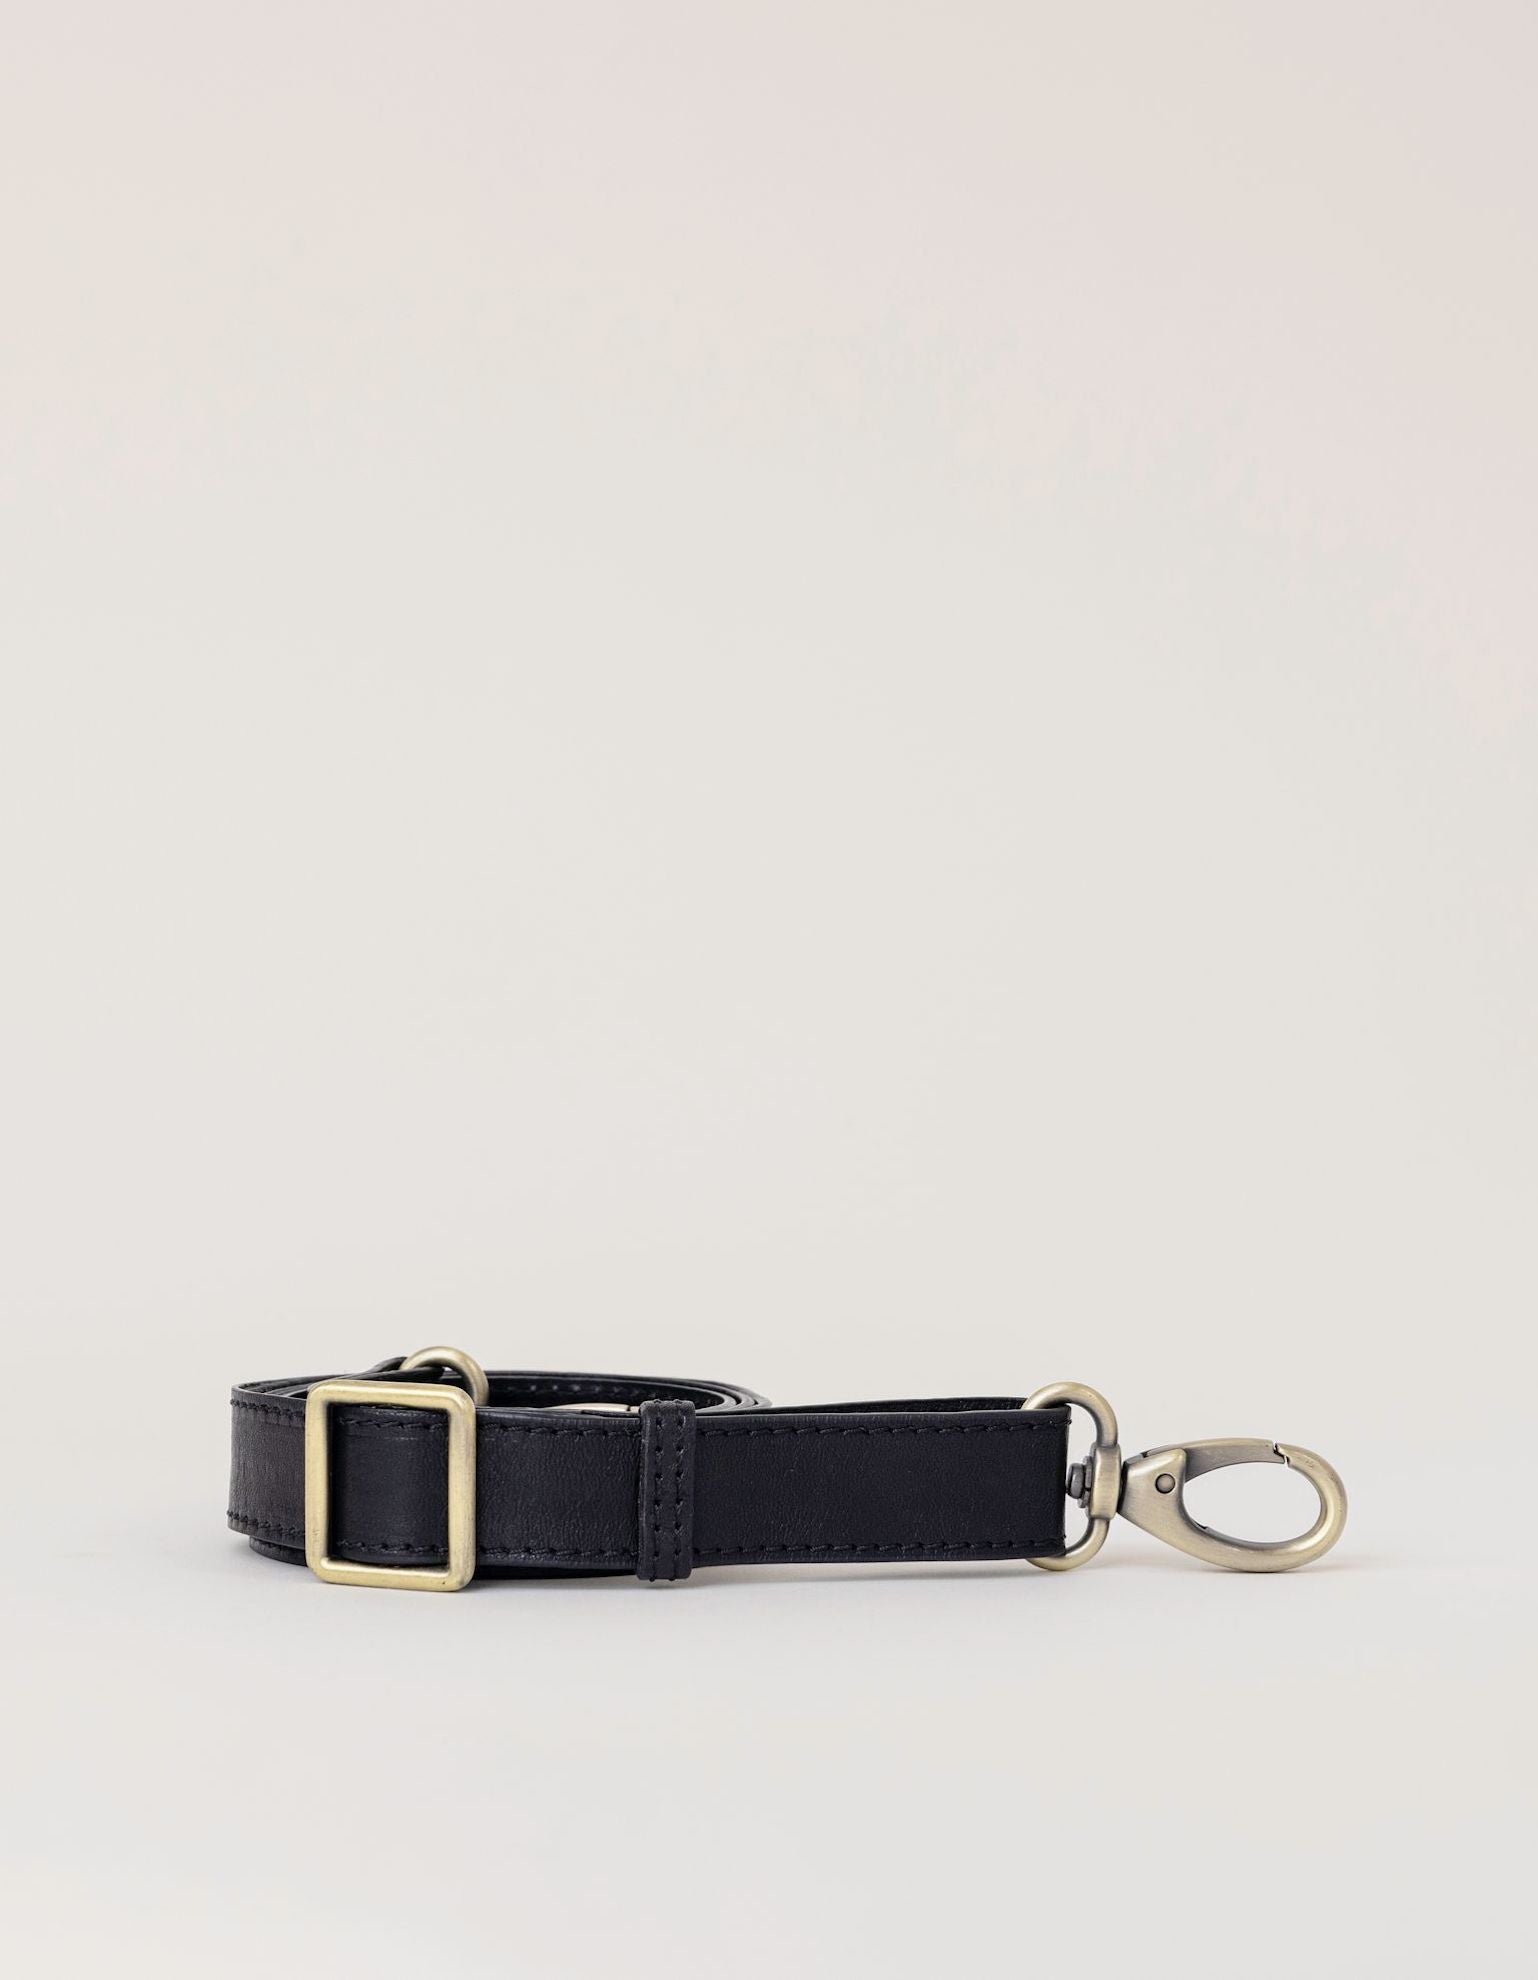 Bum Bag Strap in Black Stromboli Leather. Rolled product image.